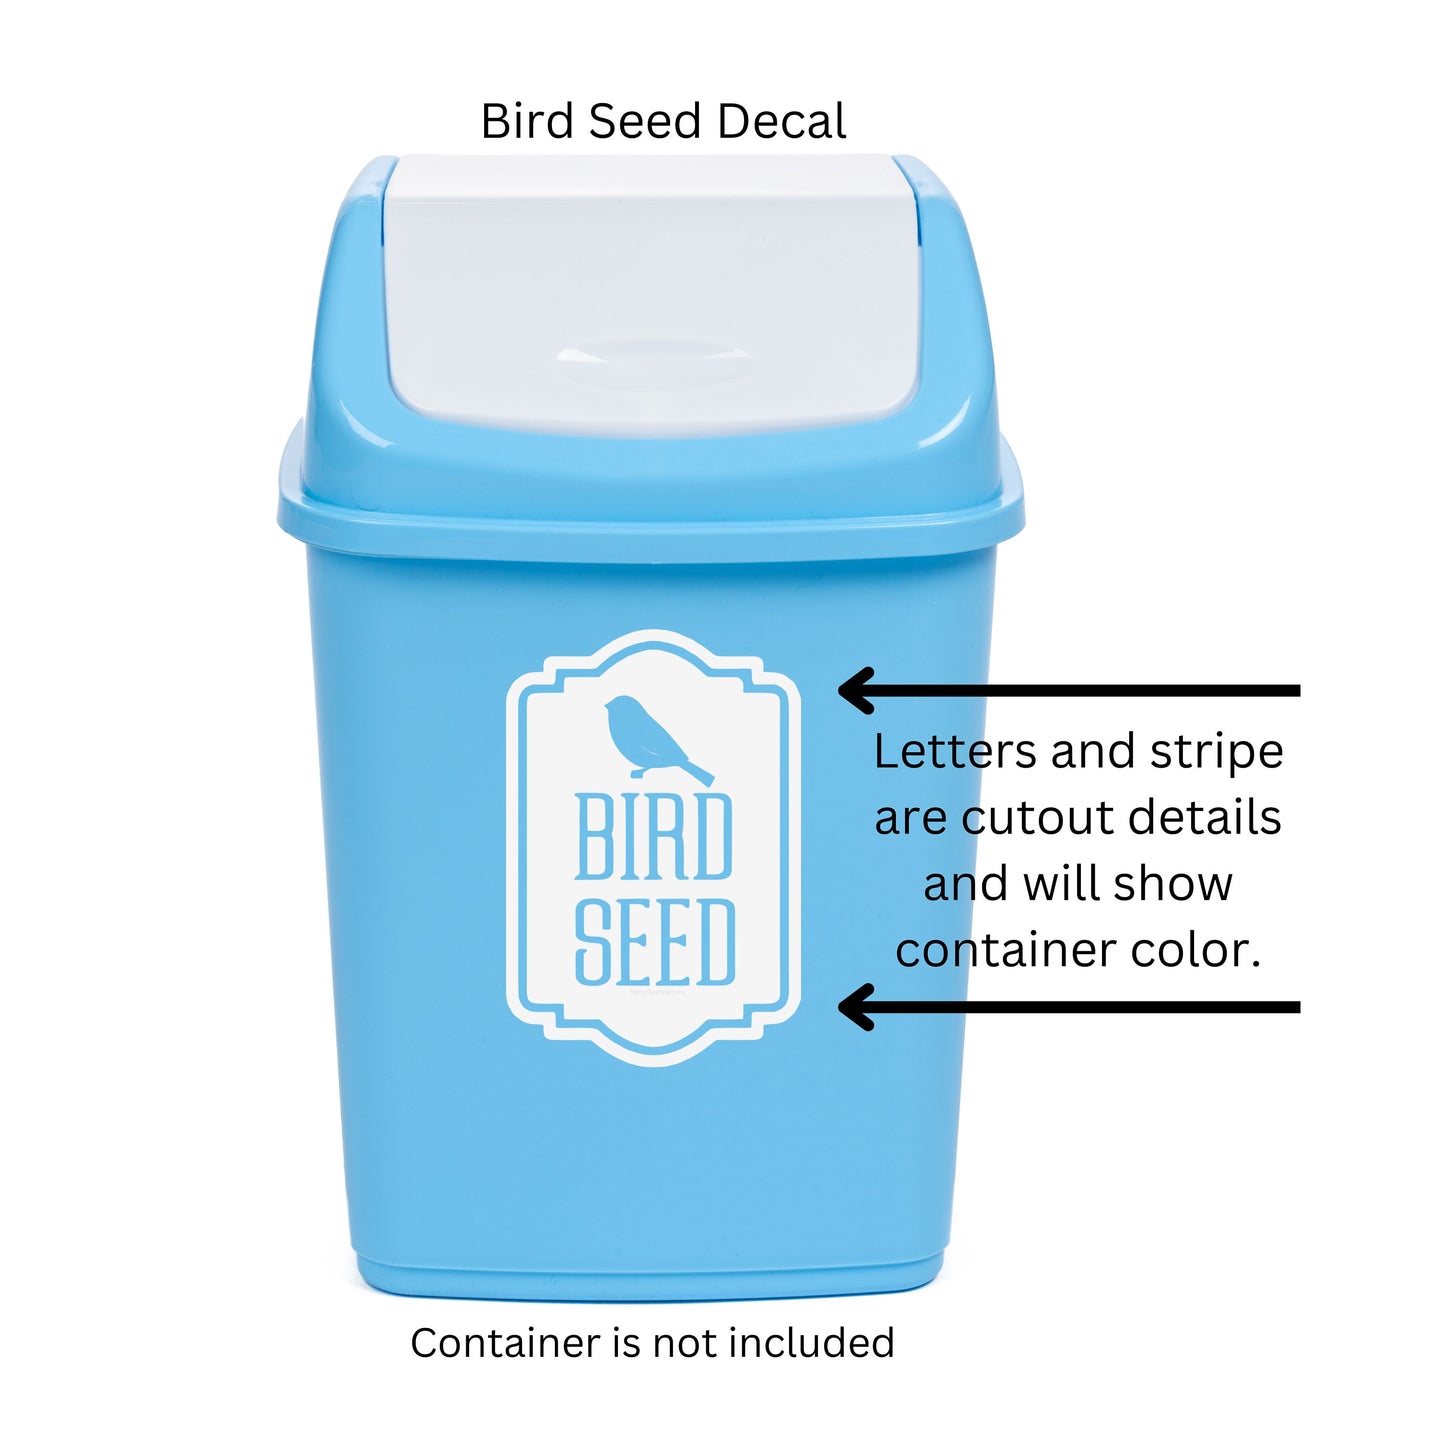 Bird Seed Decal, computer cut vinyl decal, bird seed container label, wild bird feeder seed decal, pantry labels, organized home, DECAL ONLY